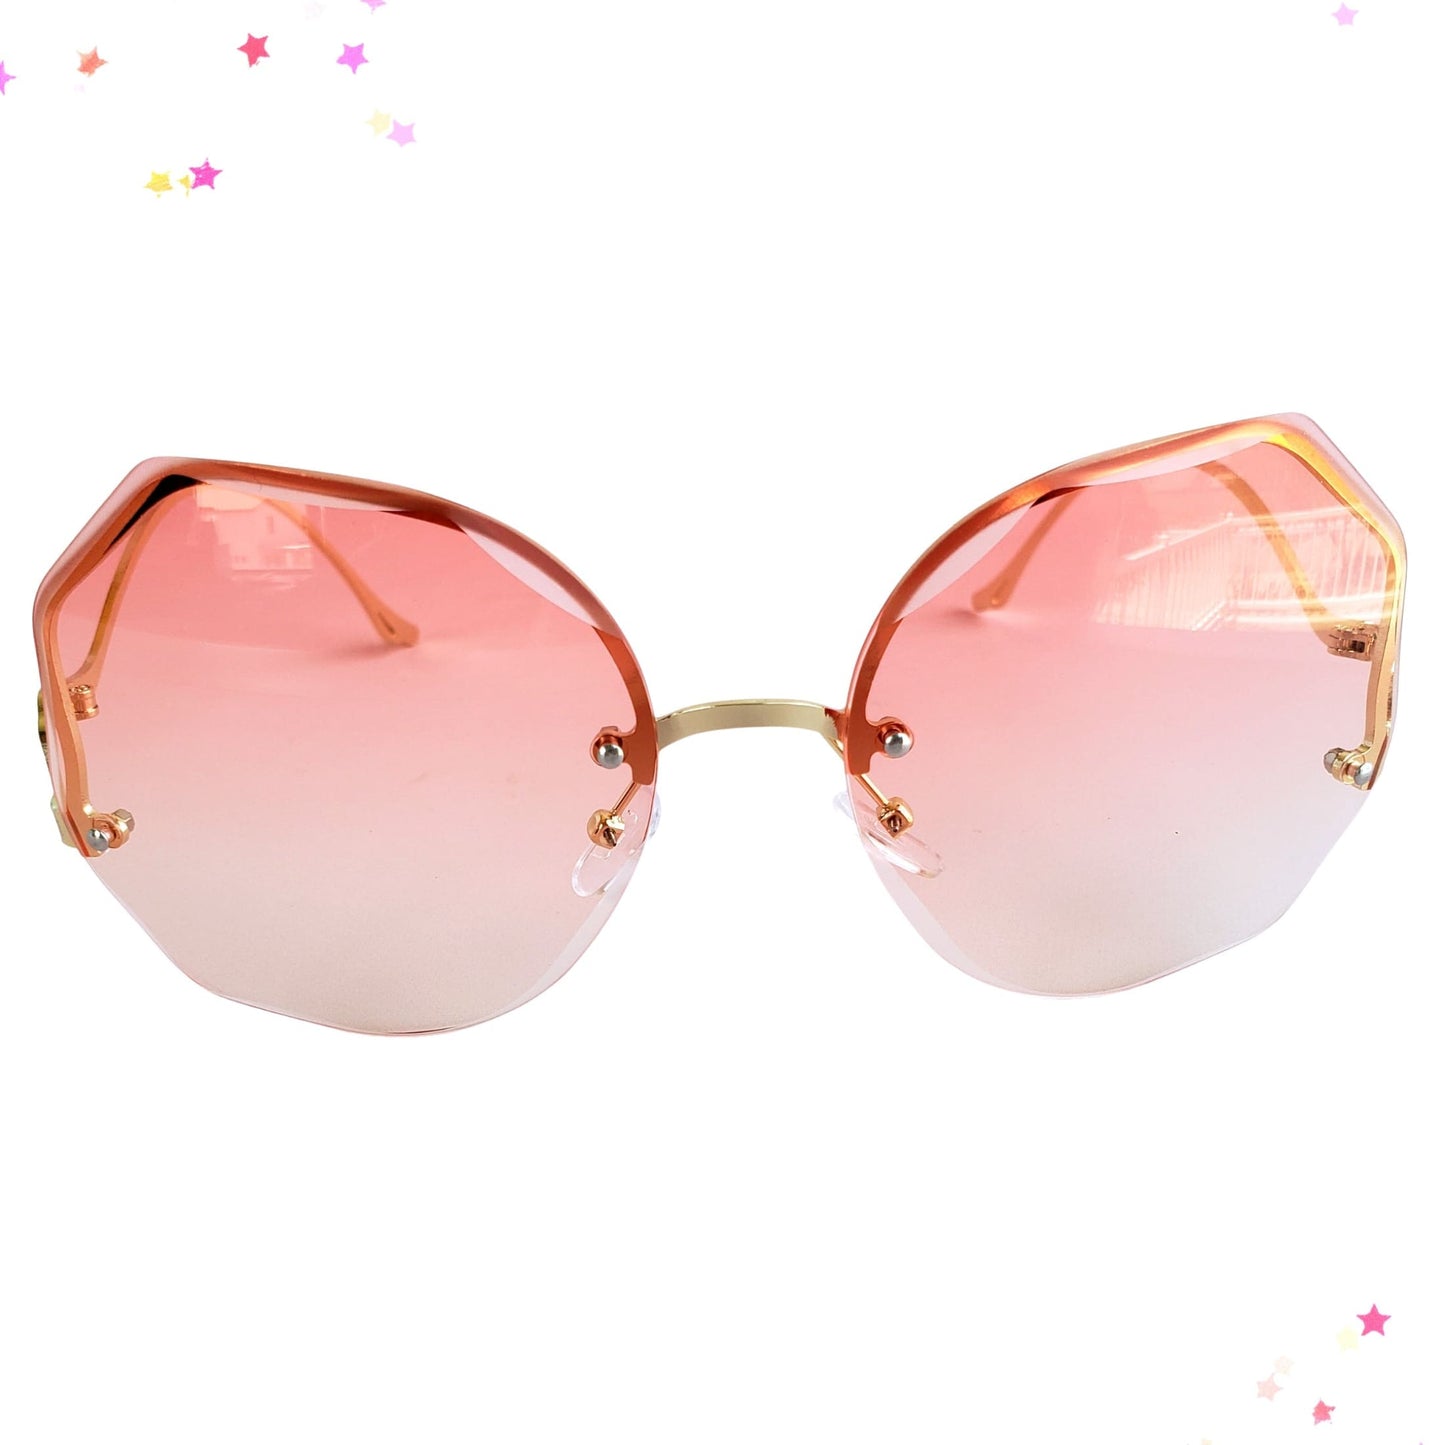 Iconic Sunglasses in Sunset from Confetti Kitty, Only 12.99